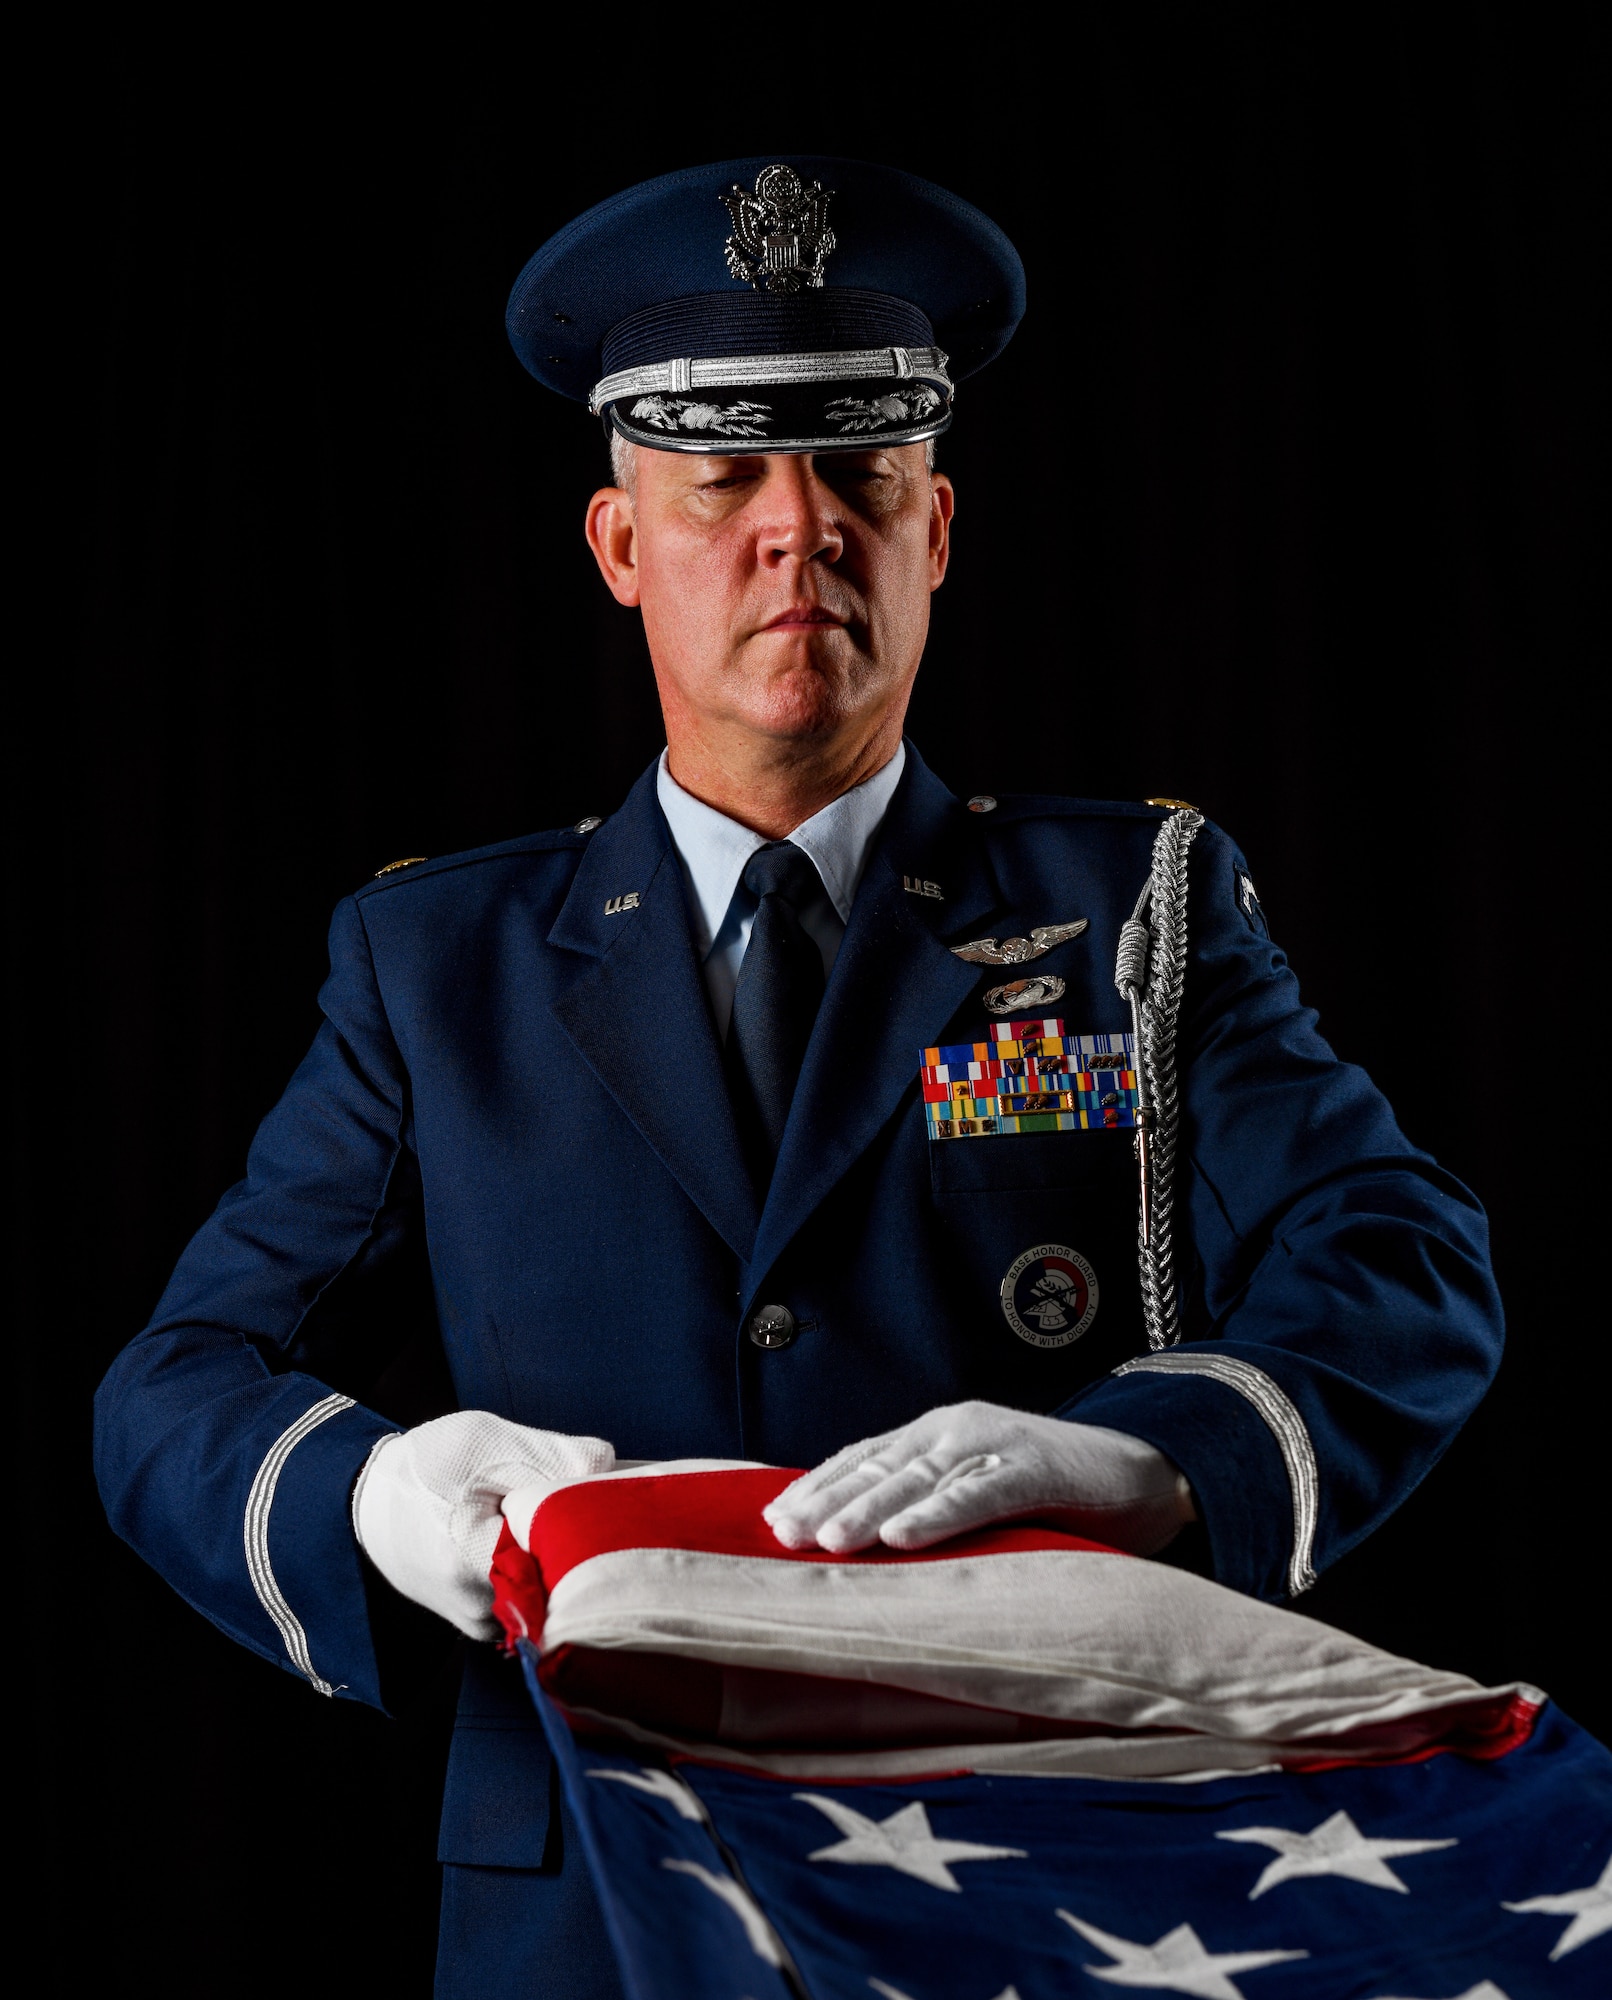 Maj. Scott Allen, 910th Airlift Wing public affairs officer, folds an American flag, Aug. 21, 2020, at Youngstown Air Reserve Station, Ohio.